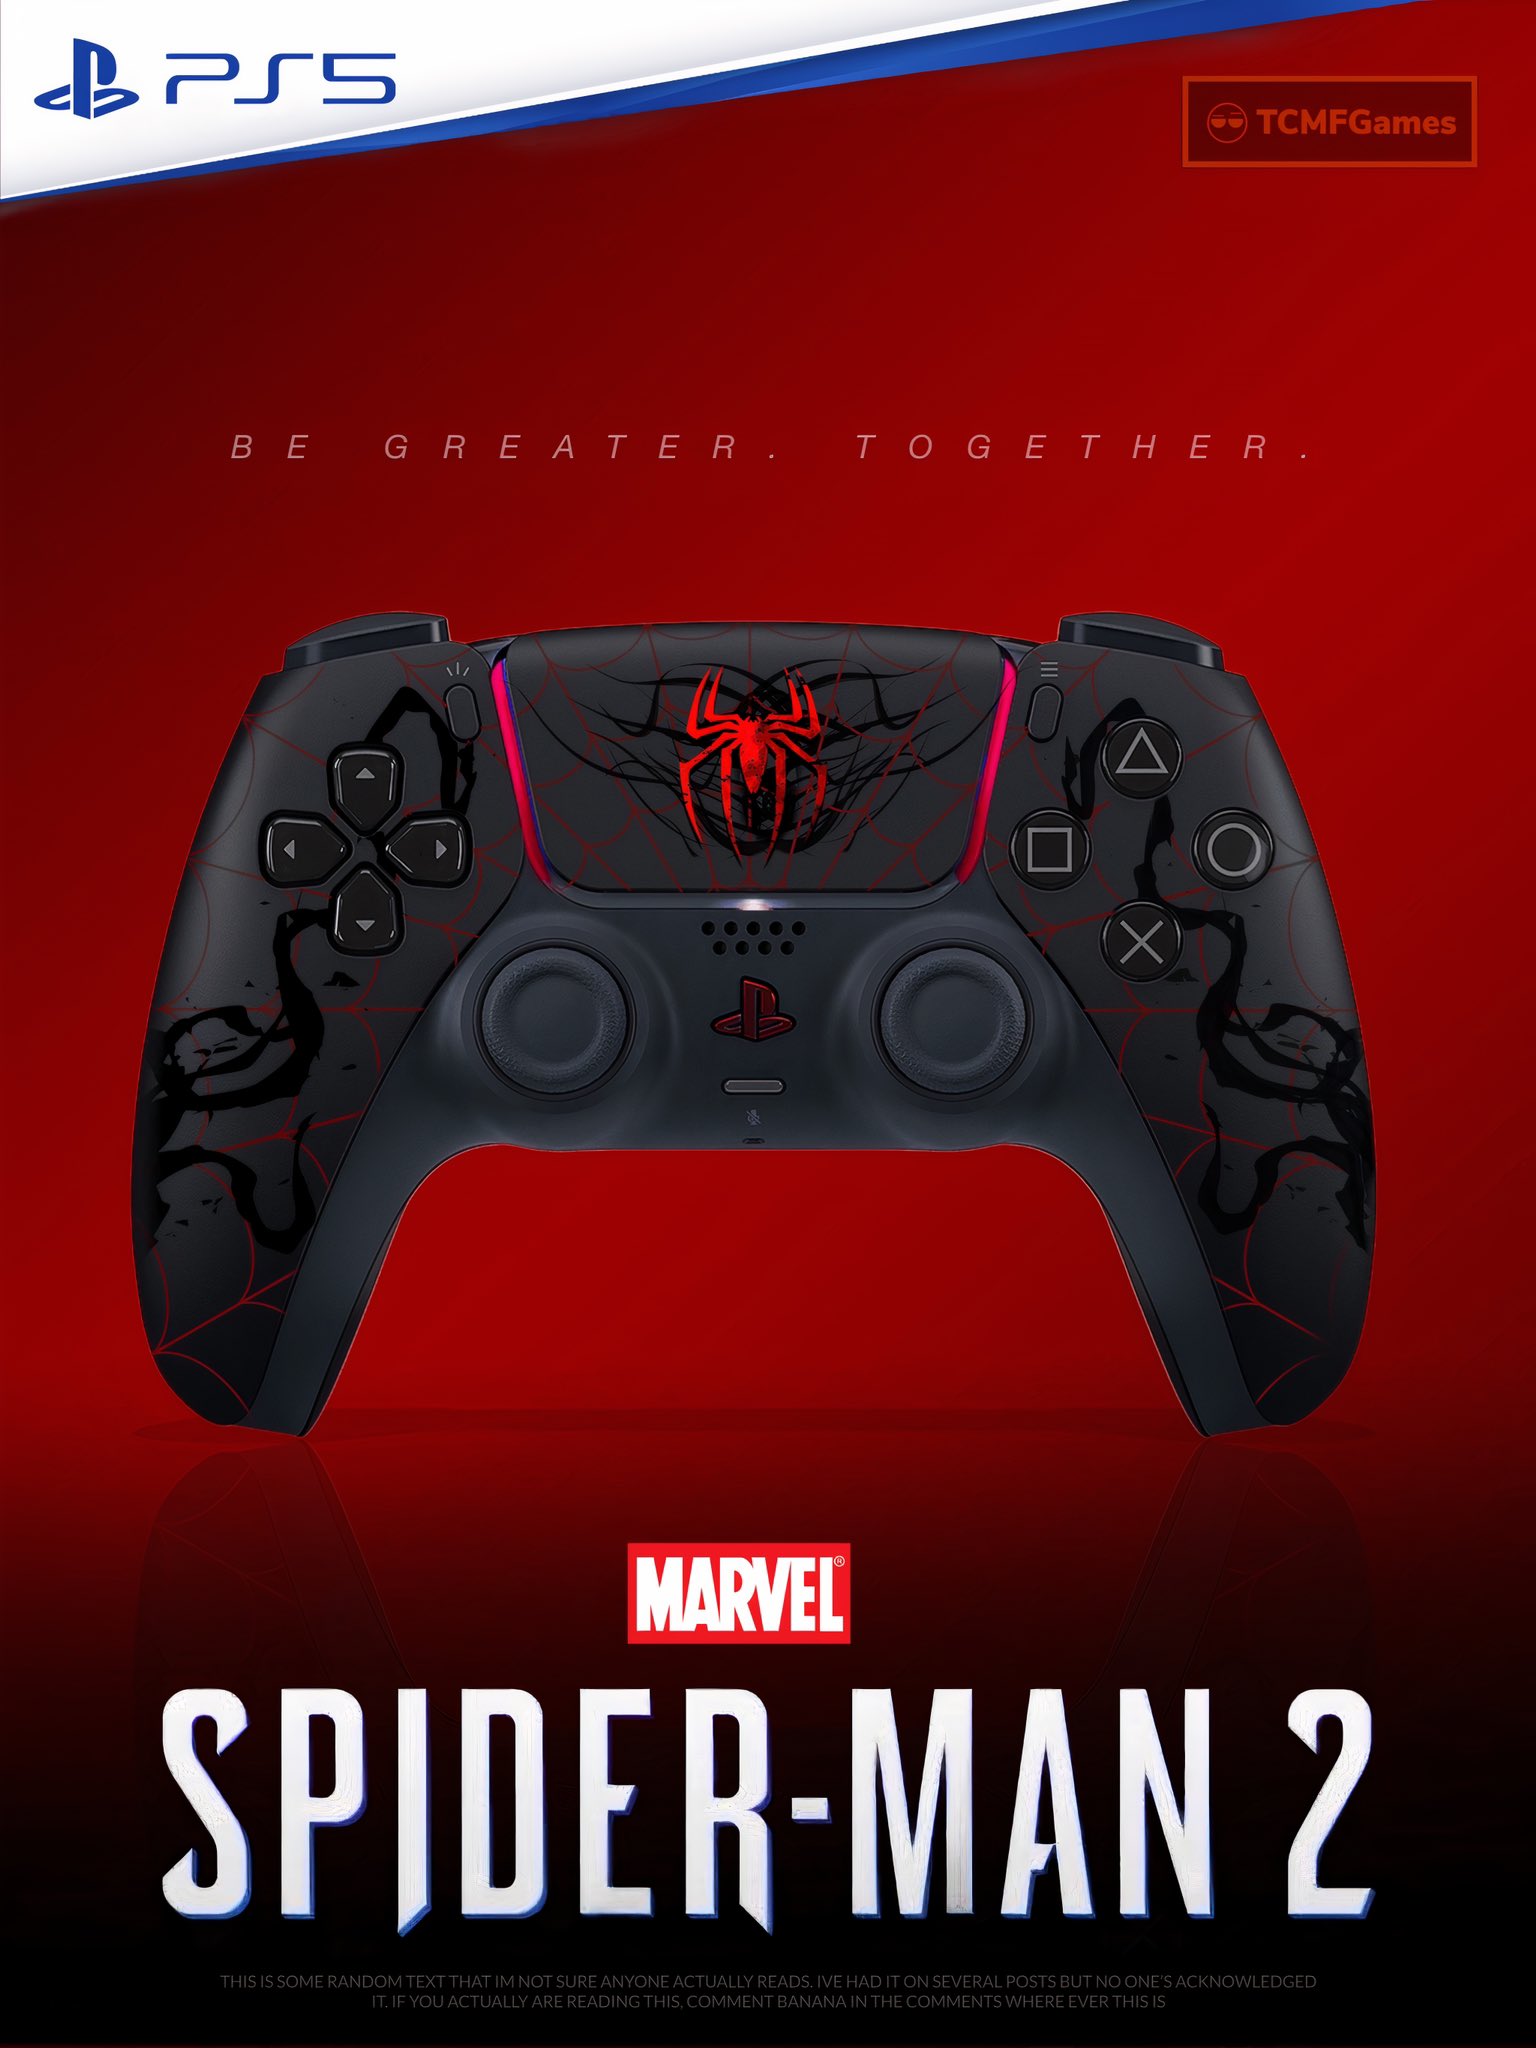 TCMFGames on X: Spider-Man 2 PS5 custom Dualsense controller - PS5Themes